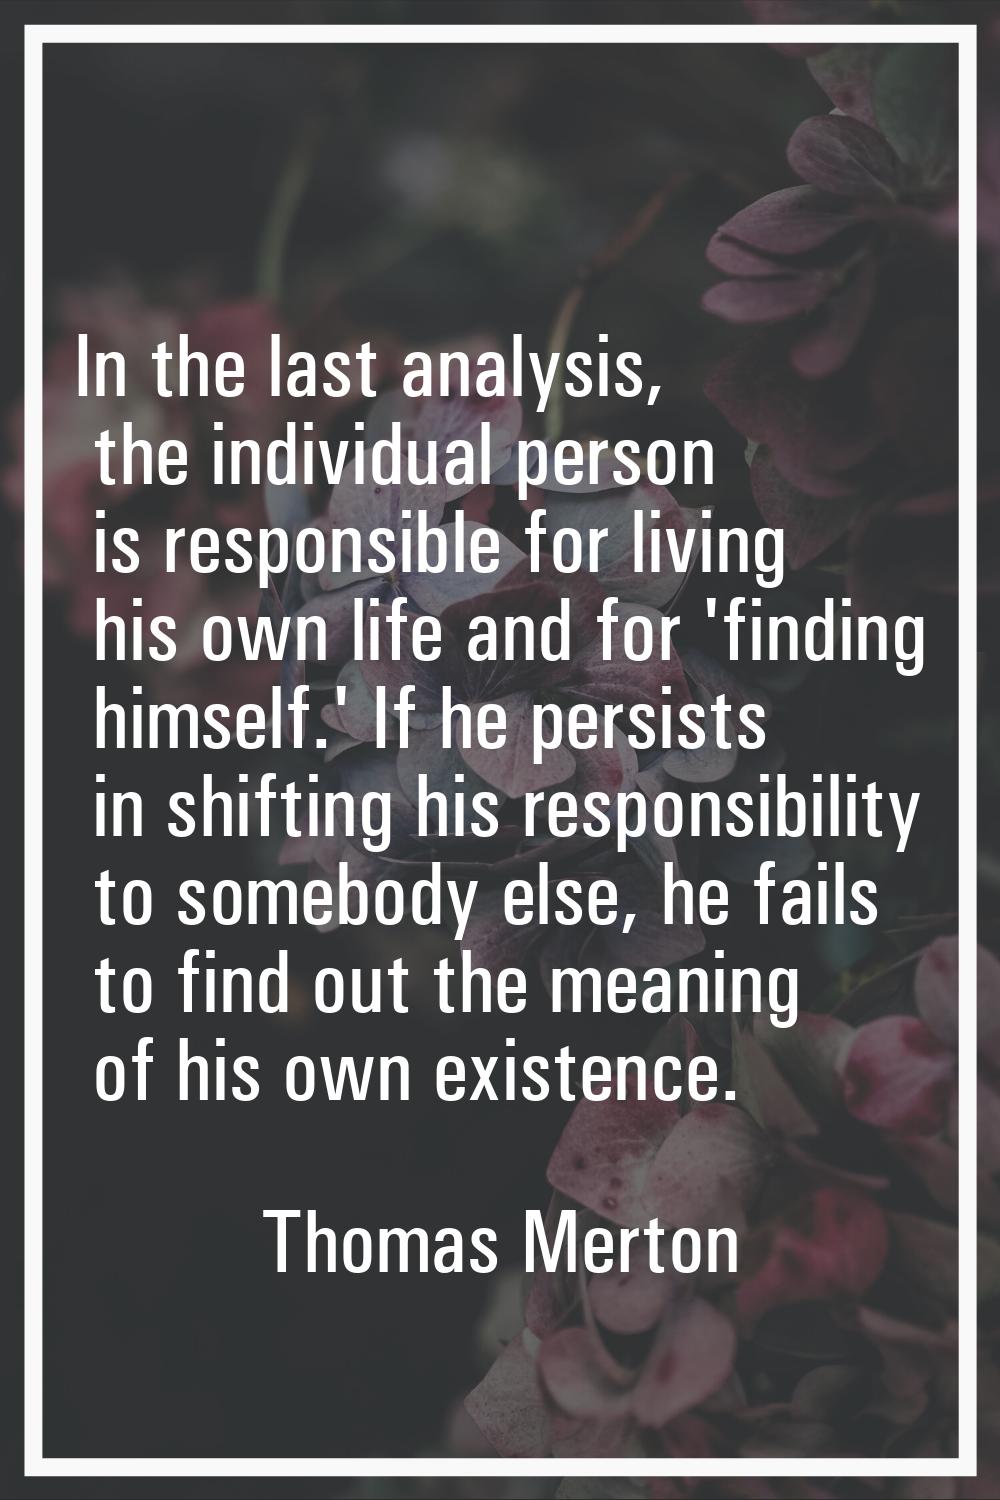 In the last analysis, the individual person is responsible for living his own life and for 'finding